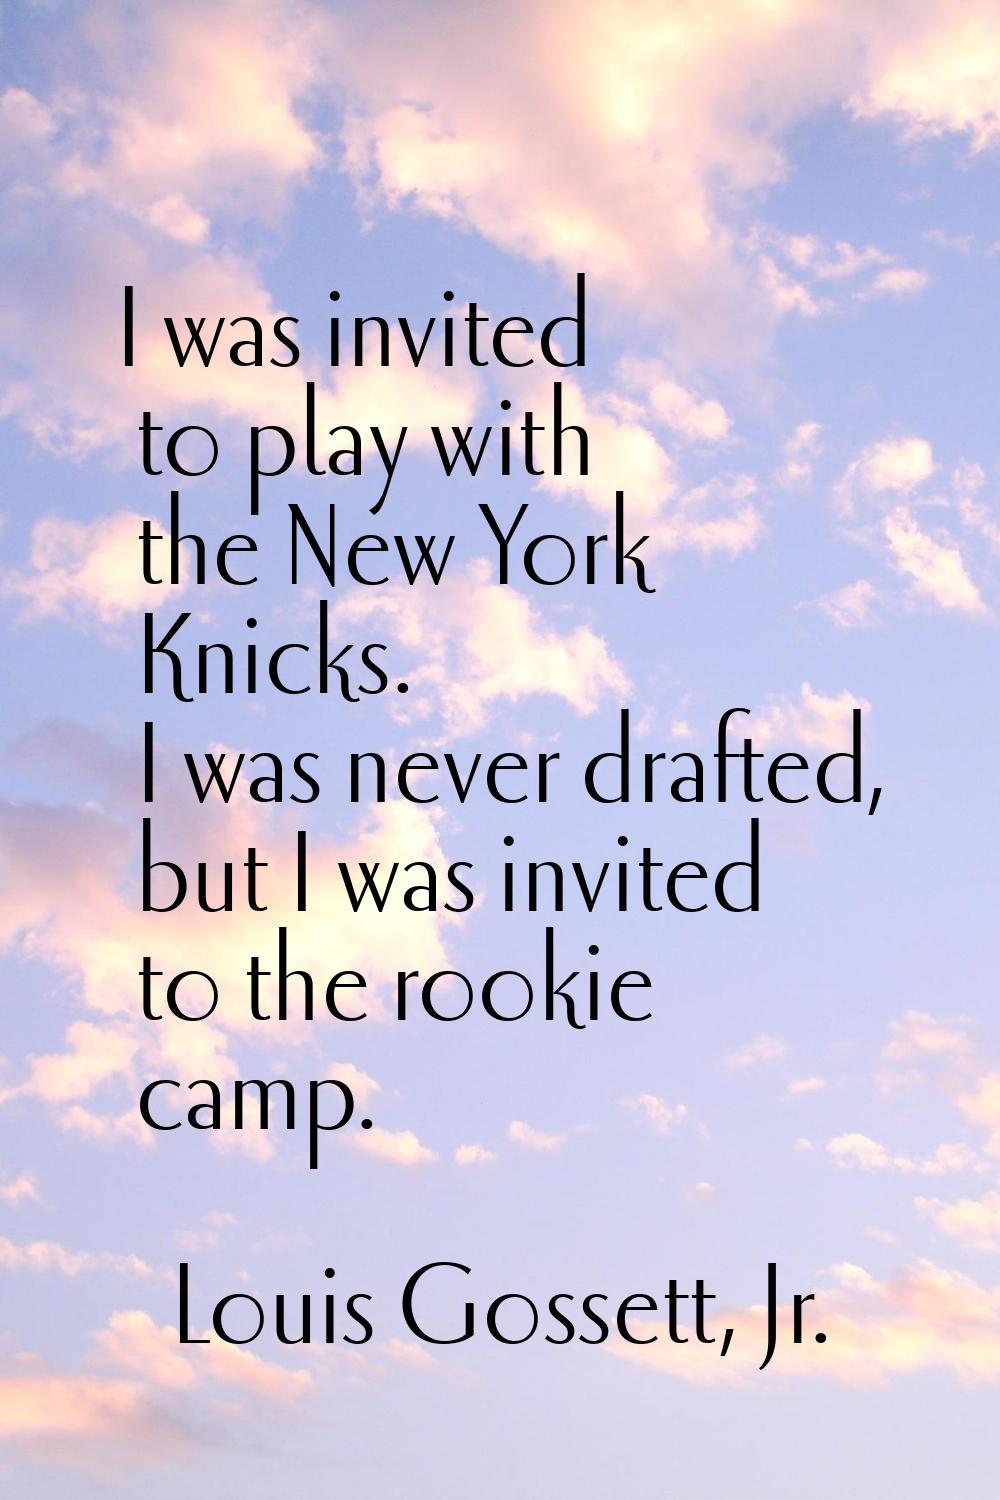 I was invited to play with the New York Knicks. I was never drafted, but I was invited to the rooki